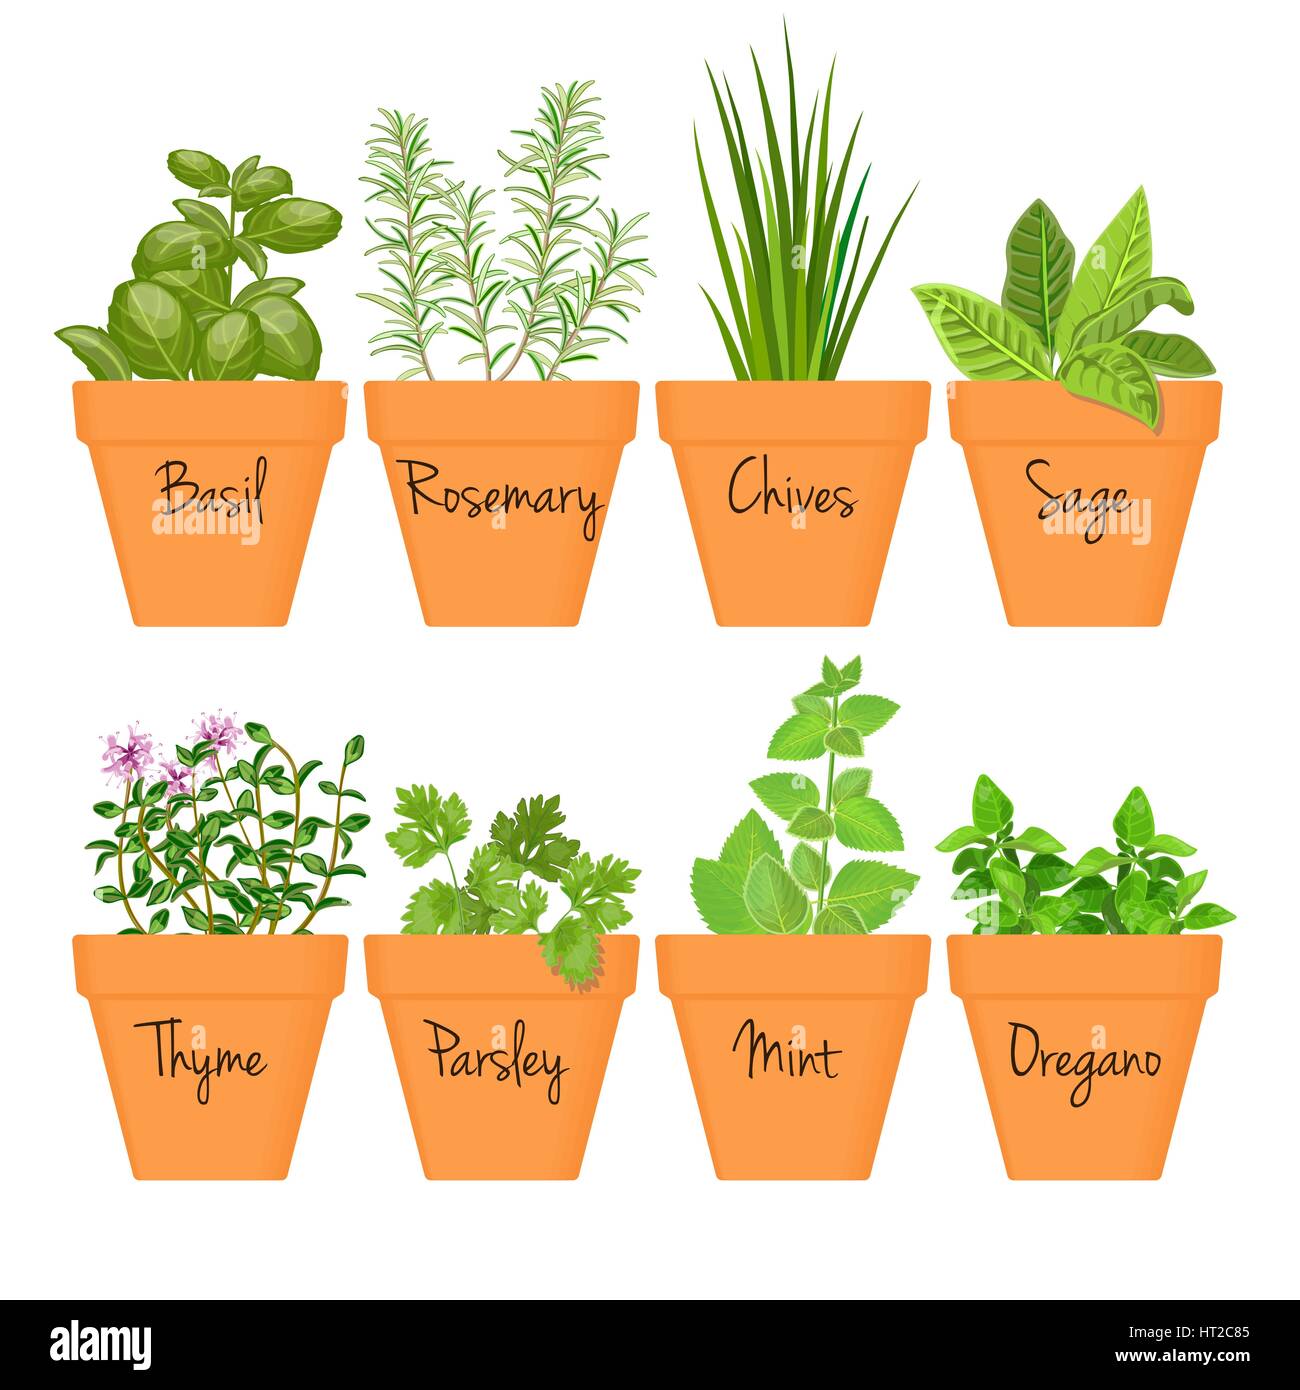 Set of vector culinary herbs in terracotta pots with labels. Green growing basil, sage, rosemary, chives, thyme, parsley, mint, oregano with text abov Stock Vector